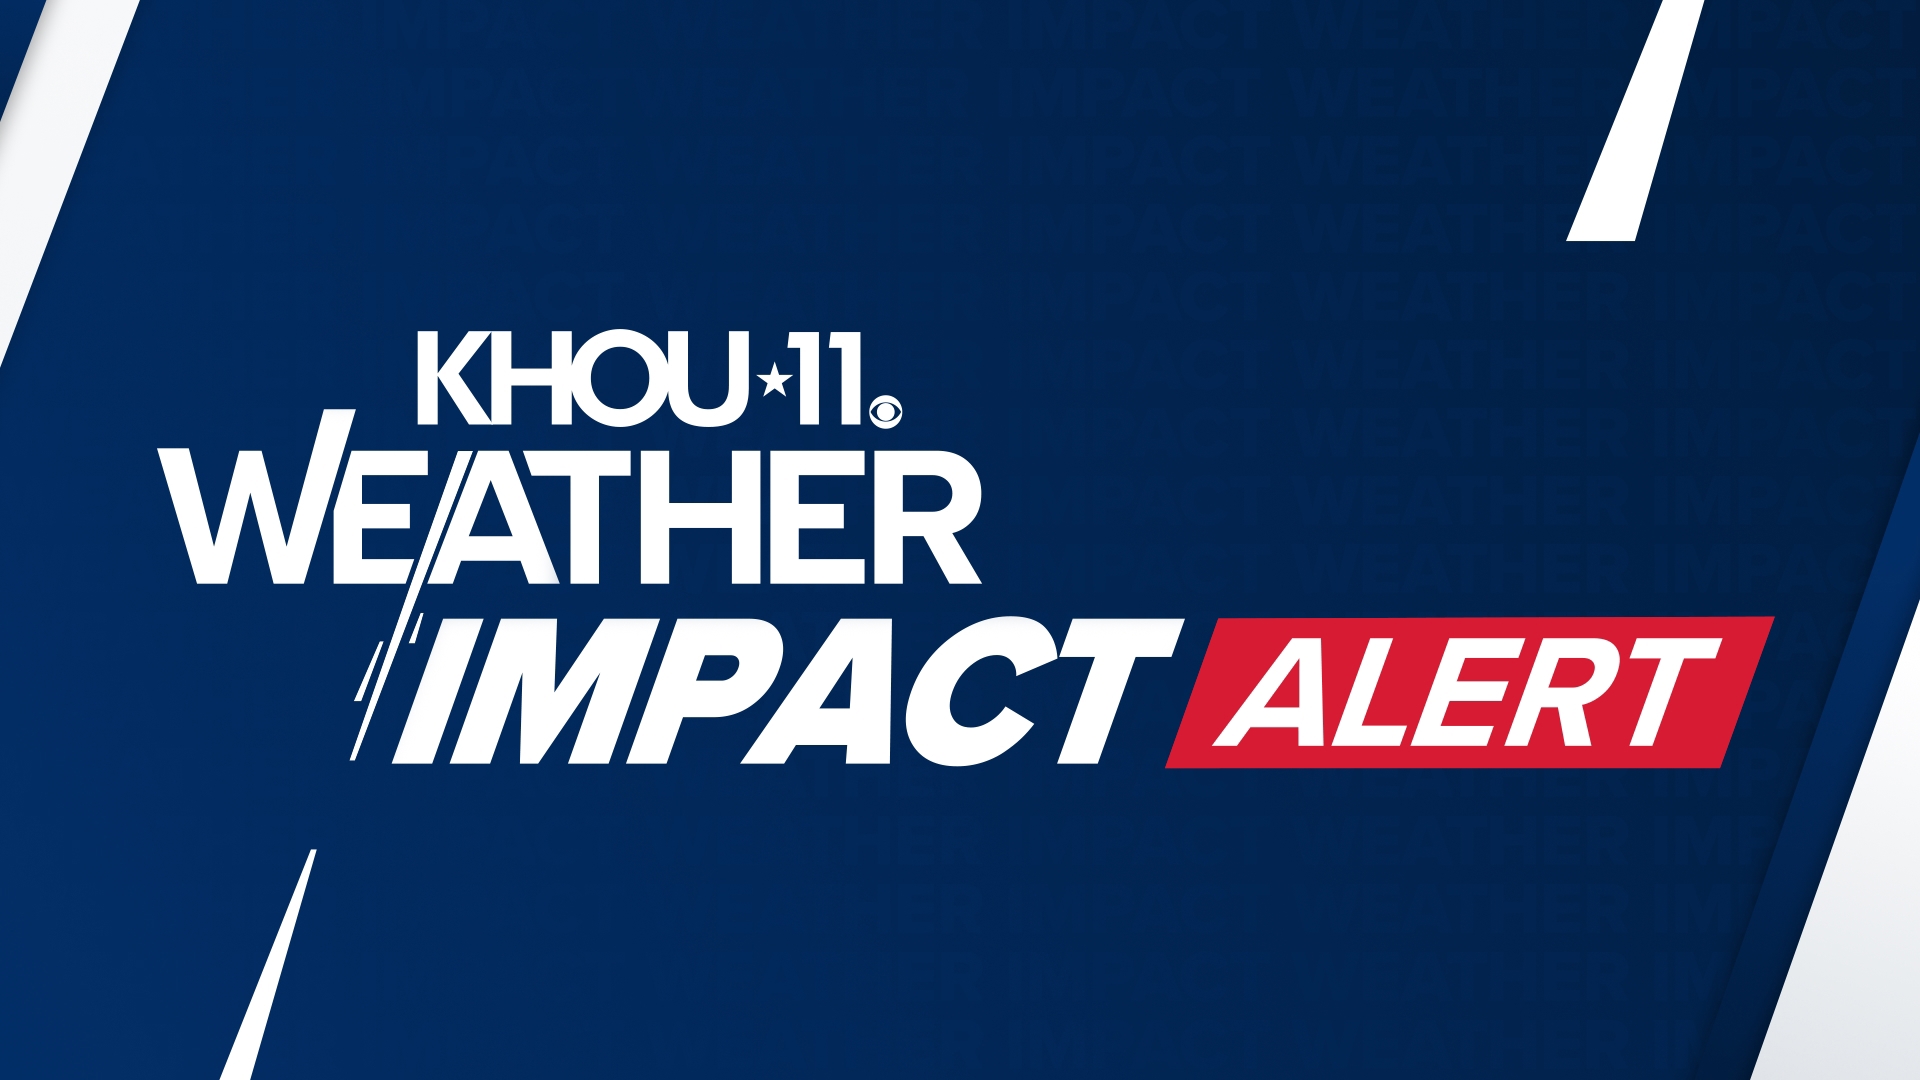 The KHOU 11 weather team will issue Weather Impact Alerts when weather conditions could affect your day.